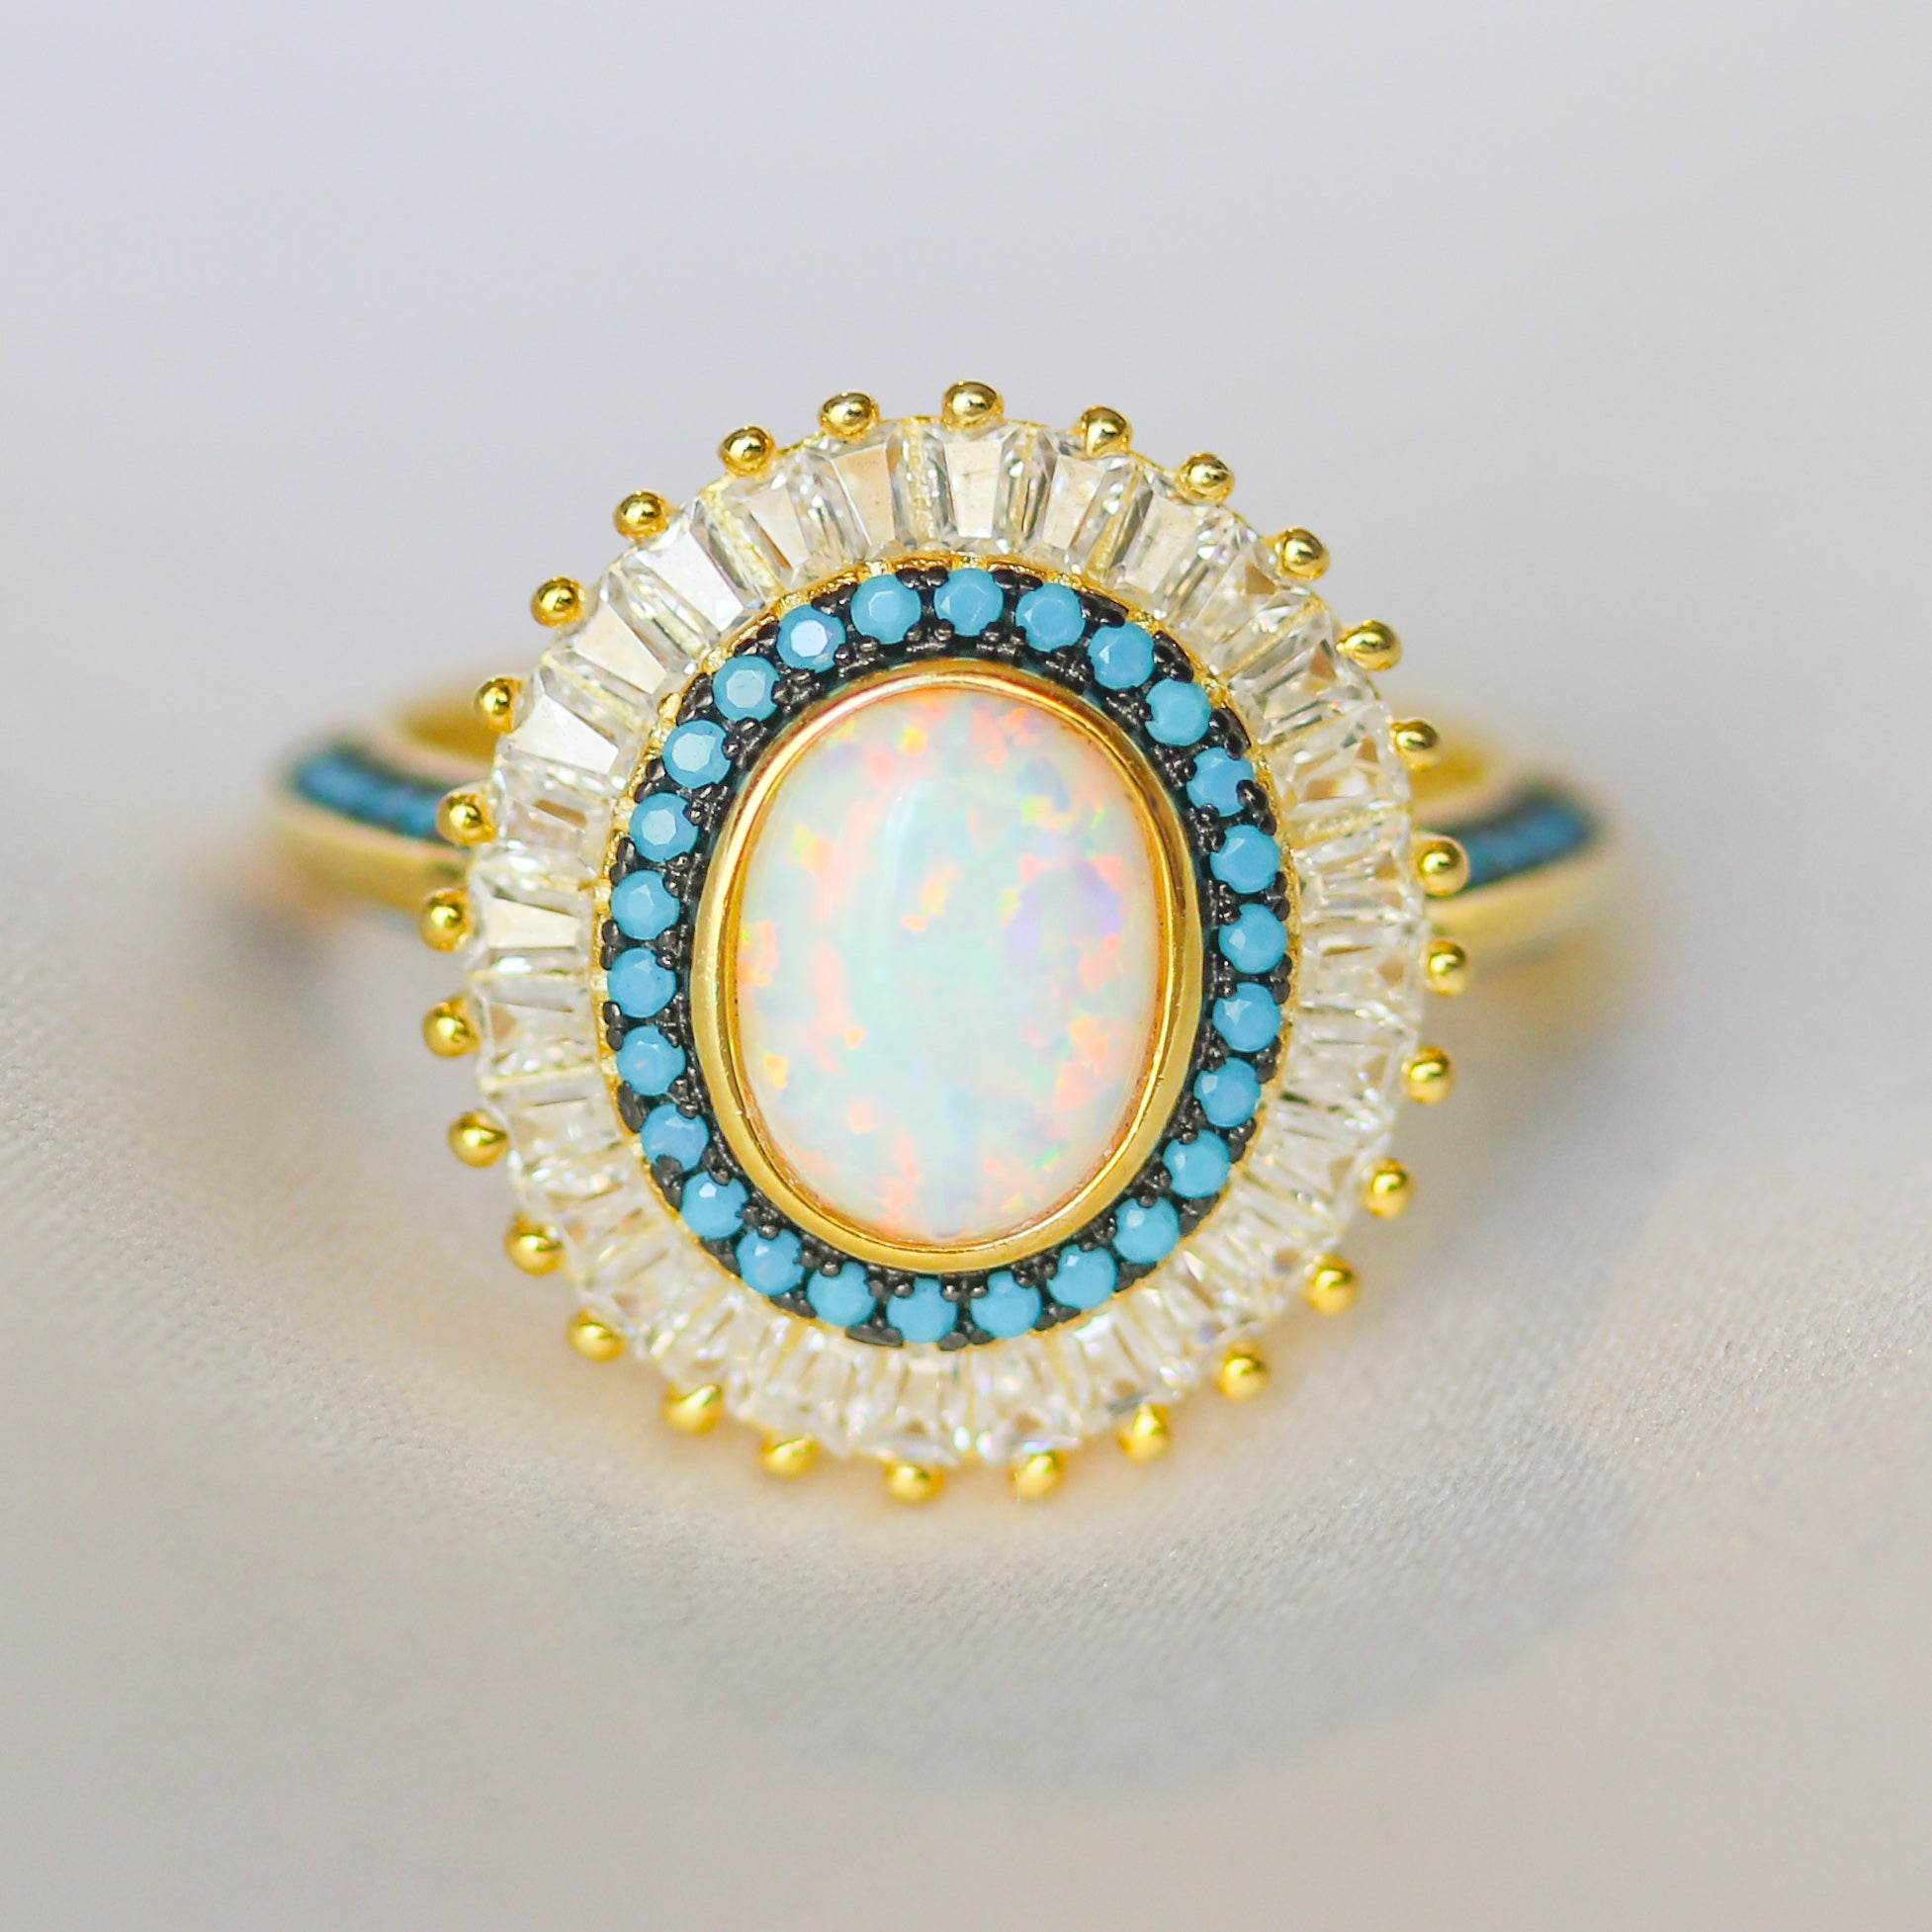 Art Deco Opal Baguette Ring Gold  Turquoise 925 sterling silver 14k gold plated cubic zirconia swarovski crystal